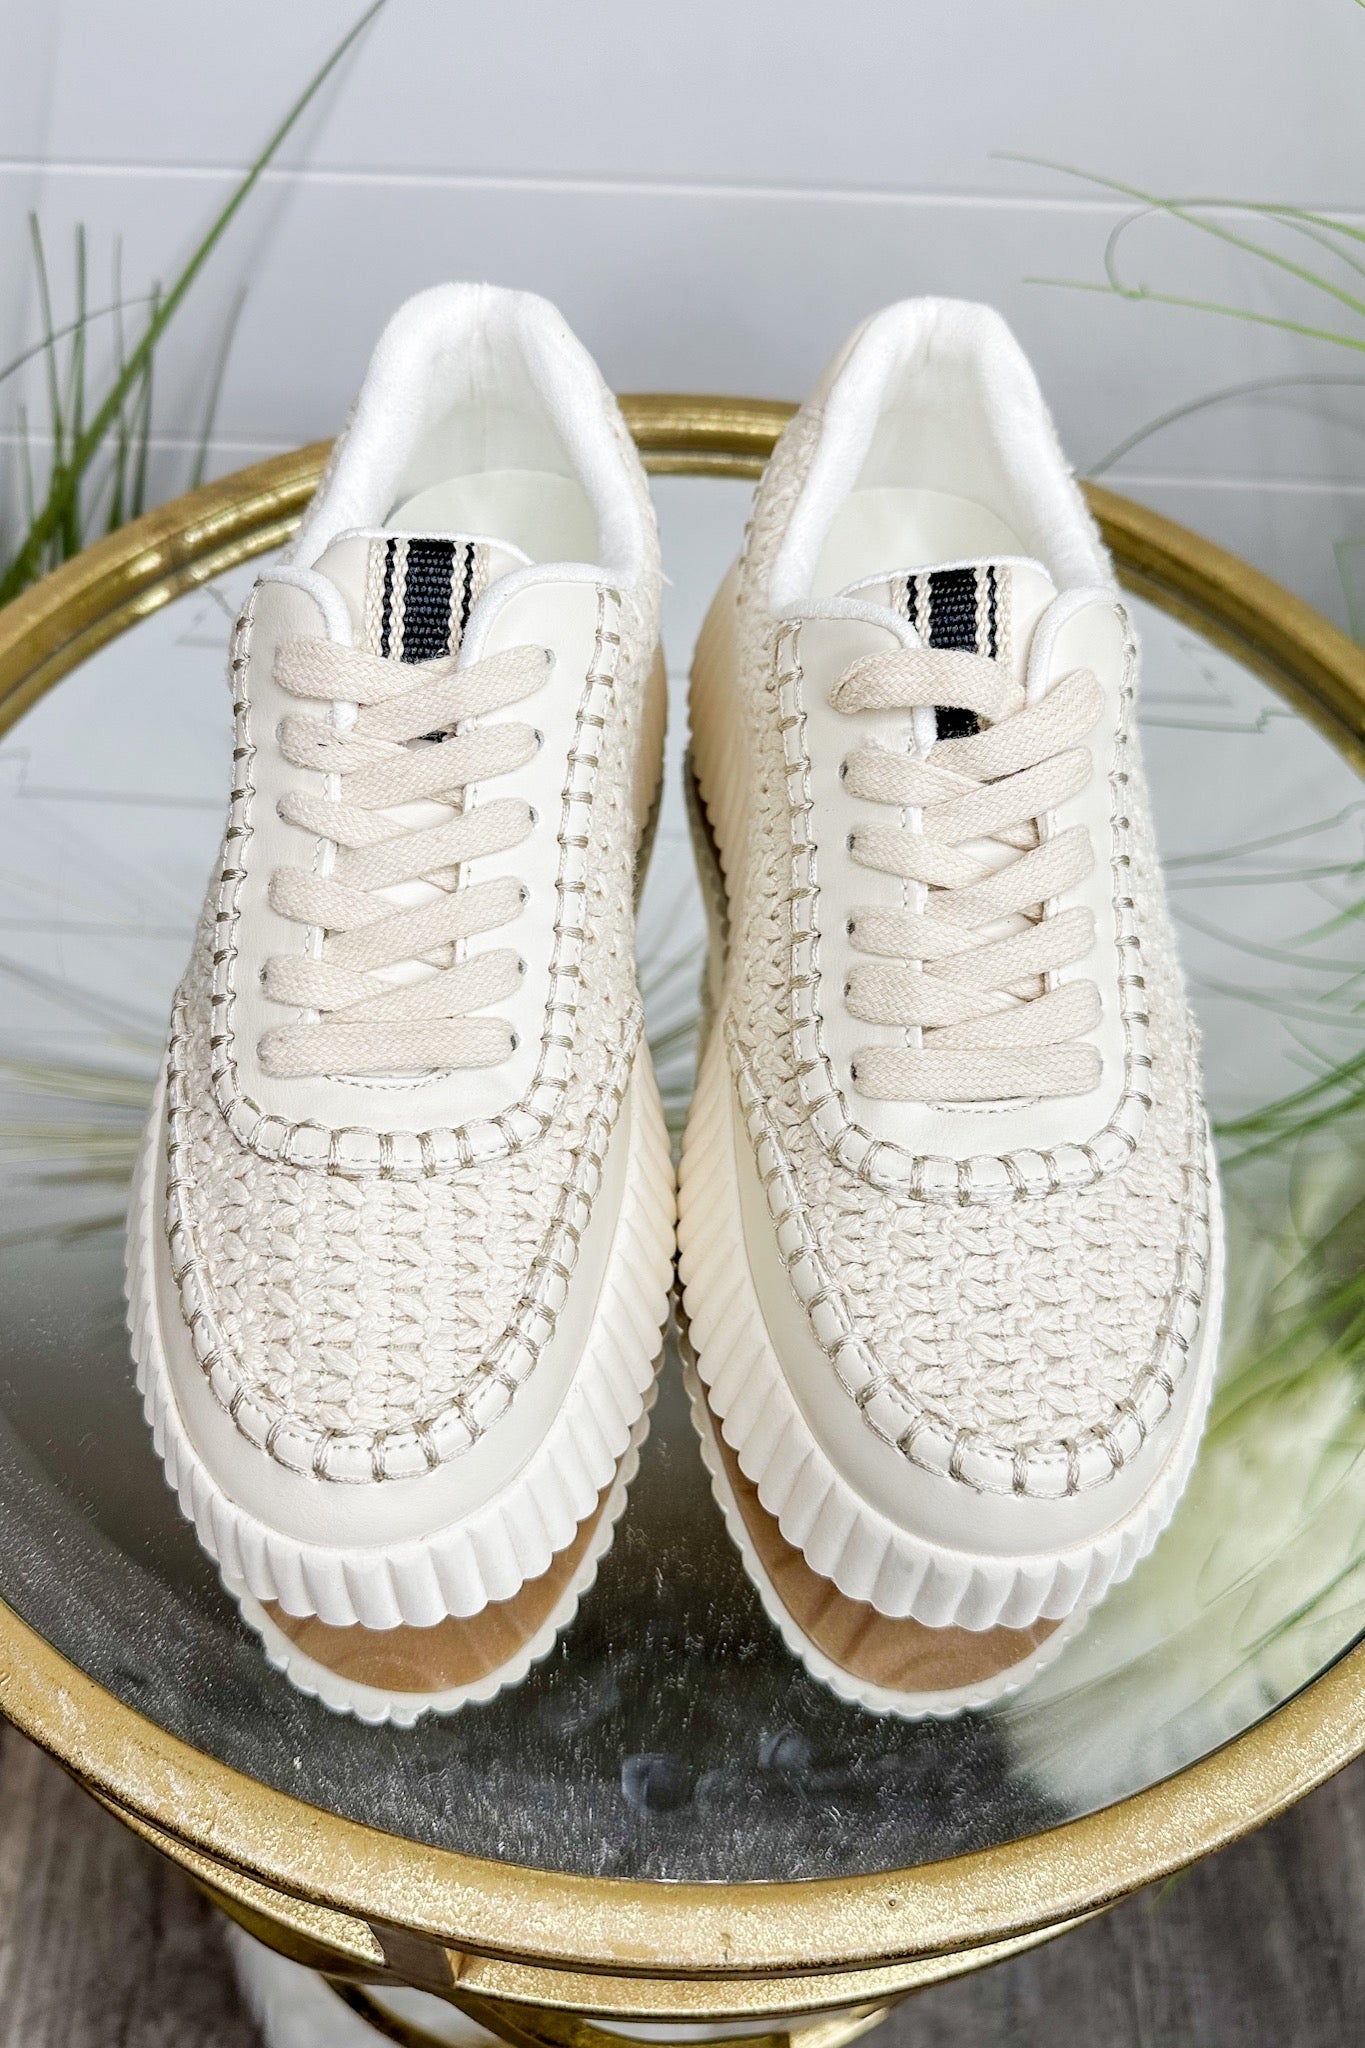 The Selina Woven Sneaker in Natural by ShuShop